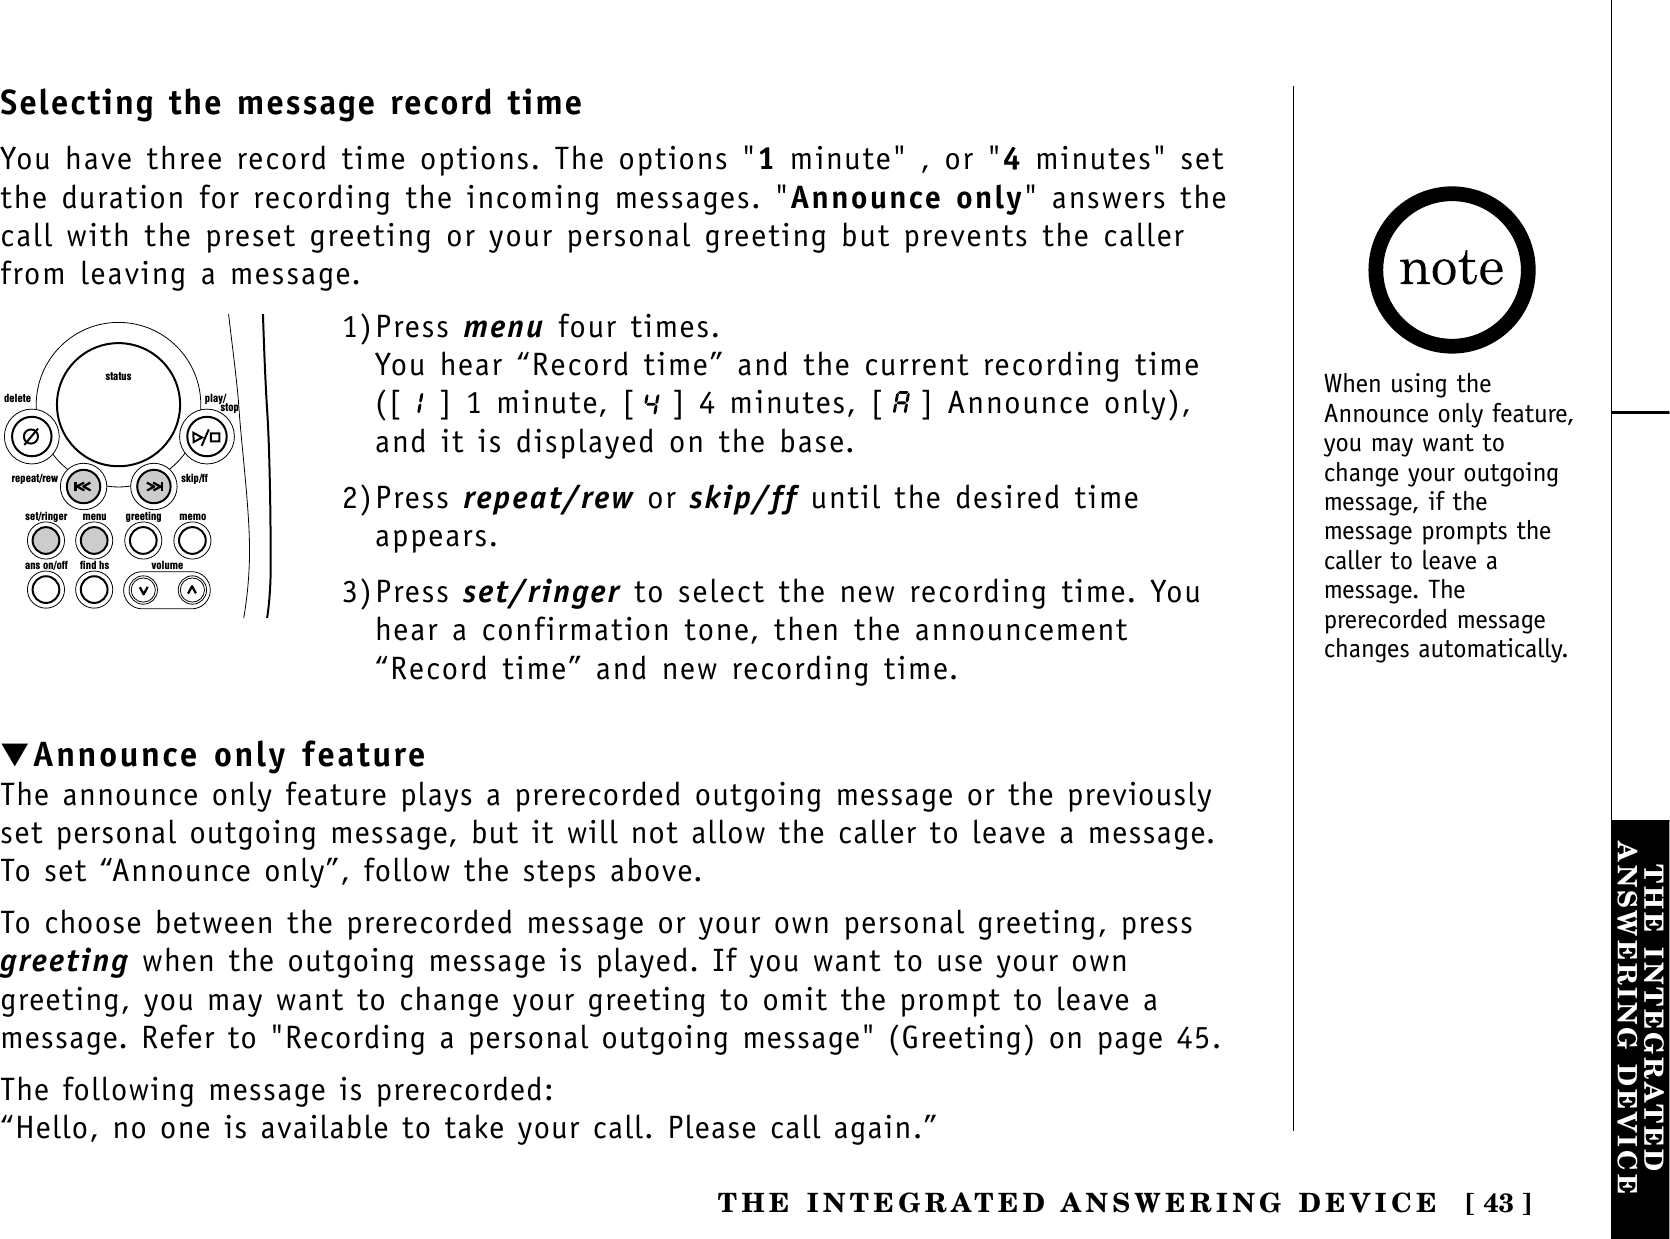 [ 43 ]THE INTEGRATEDANSWERING DEVICETHE INTEGRATED ANSWERING DEVICEset/ringer menuans on/off find hs volumegreeting memoskip/ffrepeat/rewdelete play/      stopstatus1)Press menu four times.You hear “Record time” and the current recording time([ ] 1 minute, [ ] 4 minutes, [ ] Announce only),and it is displayed on the base.2)Press repeat/rew or skip/ff until the desired timeappears.3)Press set/ringer to select the new recording time. Youhear a confirmation tone, then the announcement“Record time” and new recording time.▼Announce only featureThe announce only feature plays a prerecorded outgoing message or the previouslyset personal outgoing message, but it will not allow the caller to leave a message.To set “Announce only”, follow the steps above.To choose between the prerecorded message or your own personal greeting, pressgreeting when the outgoing message is played. If you want to use your owngreeting, you may want to change your greeting to omit the prompt to leave amessage. Refer to &quot;Recording a personal outgoing message&quot; (Greeting) on page 45.The following message is prerecorded:“Hello, no one is available to take your call. Please call again.”Selecting the message record timeYou have three record time options. The options &quot;1minute&quot; , or &quot;4minutes&quot; setthe duration for recording the incoming messages. &quot;Announce only&quot; answers thecall with the preset greeting or your personal greeting but prevents the callerfrom leaving a message. When using theAnnounce only feature,you may want tochange your outgoingmessage, if themessage prompts thecaller to leave amessage. Theprerecorded messagechanges automatically.